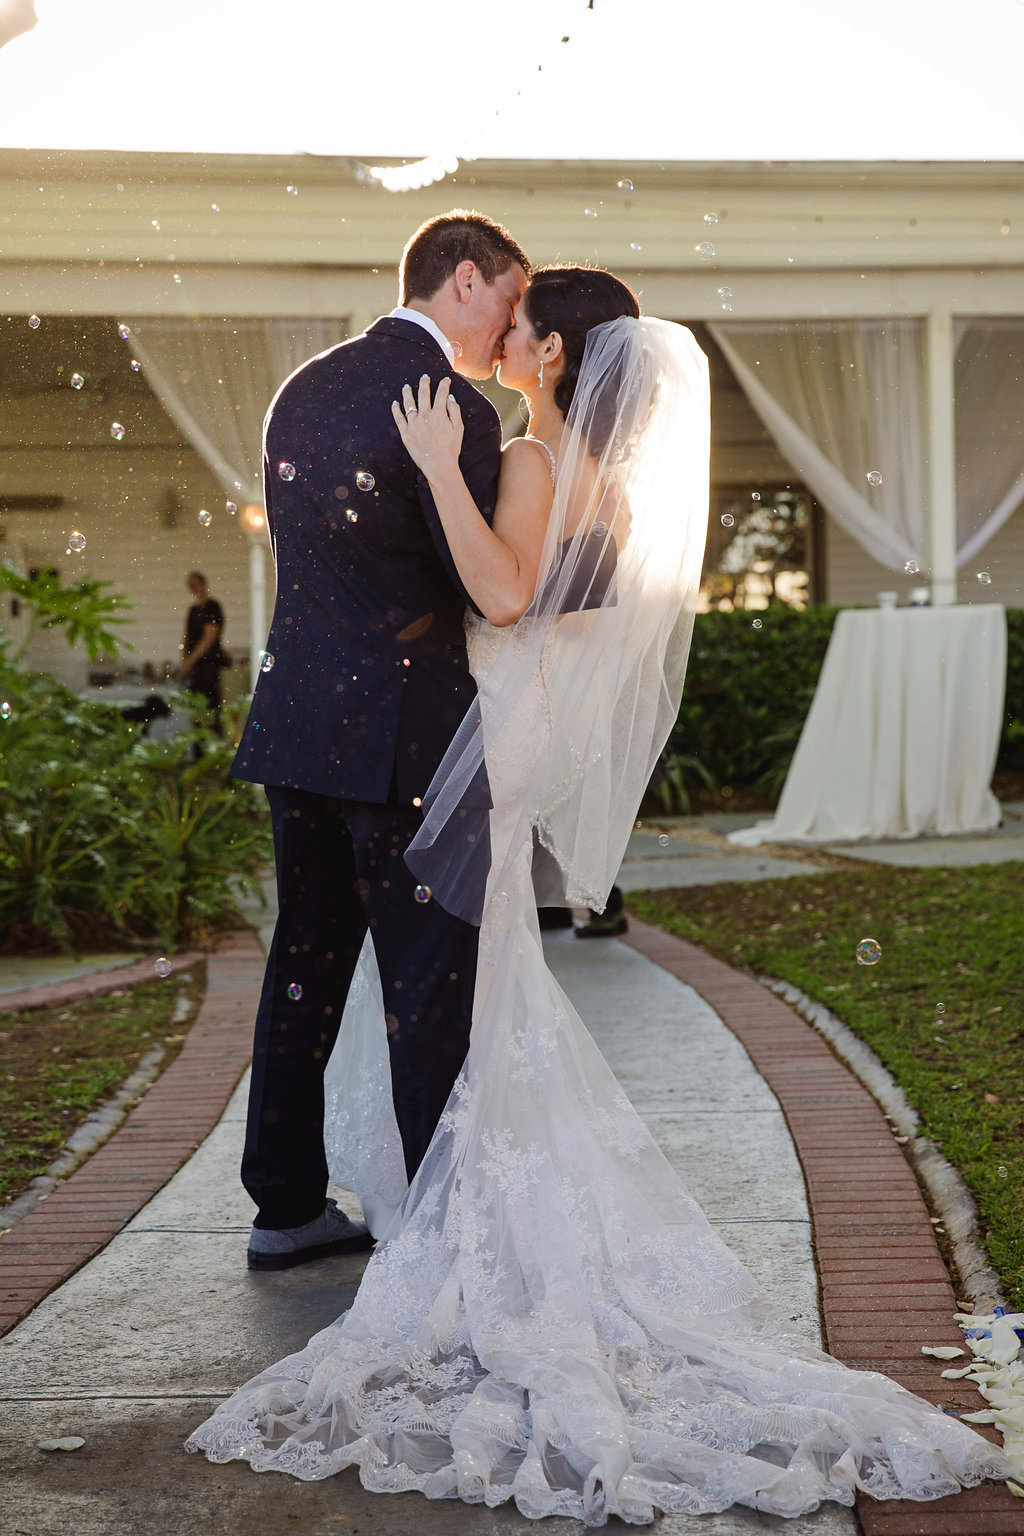 Outdoor Bride and Groom Portrait with Bride Wearing White Lace Wedding Dress and Veil and Groom Wearing Blue Tuxedo and Bubbles | Tampa Bay Wedding Photographer Marc Edwards Photographs